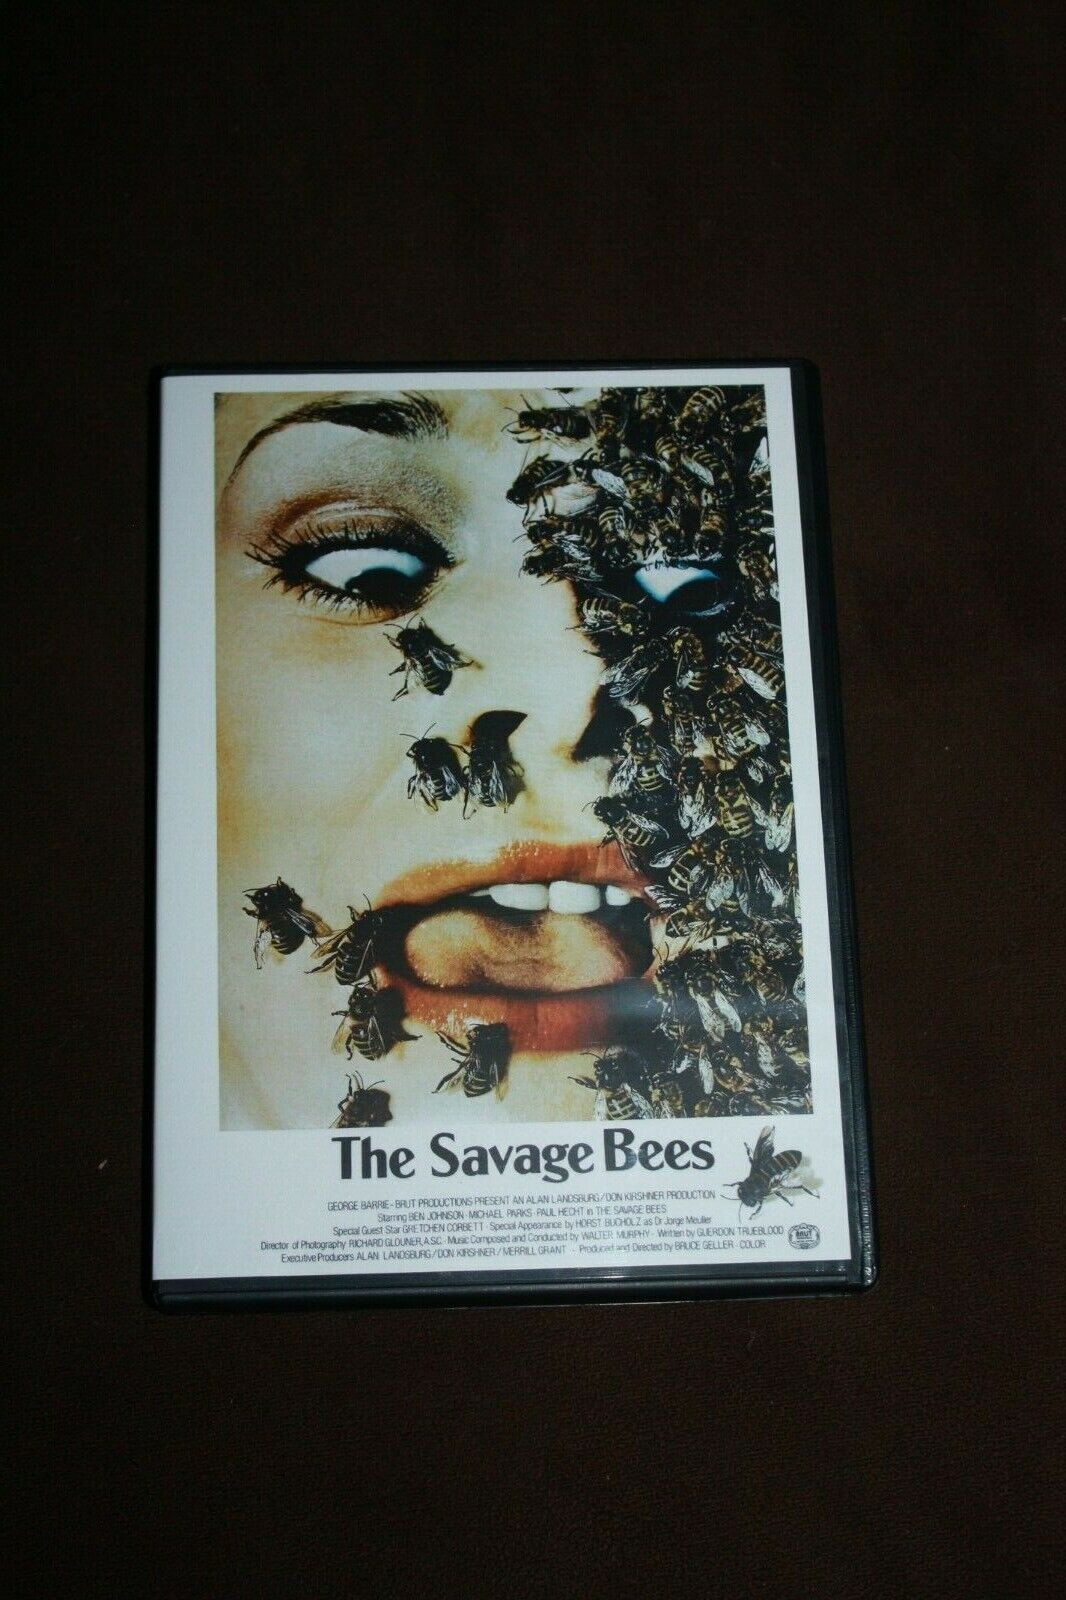 THE SAVAGE BEES - DVD - NEW